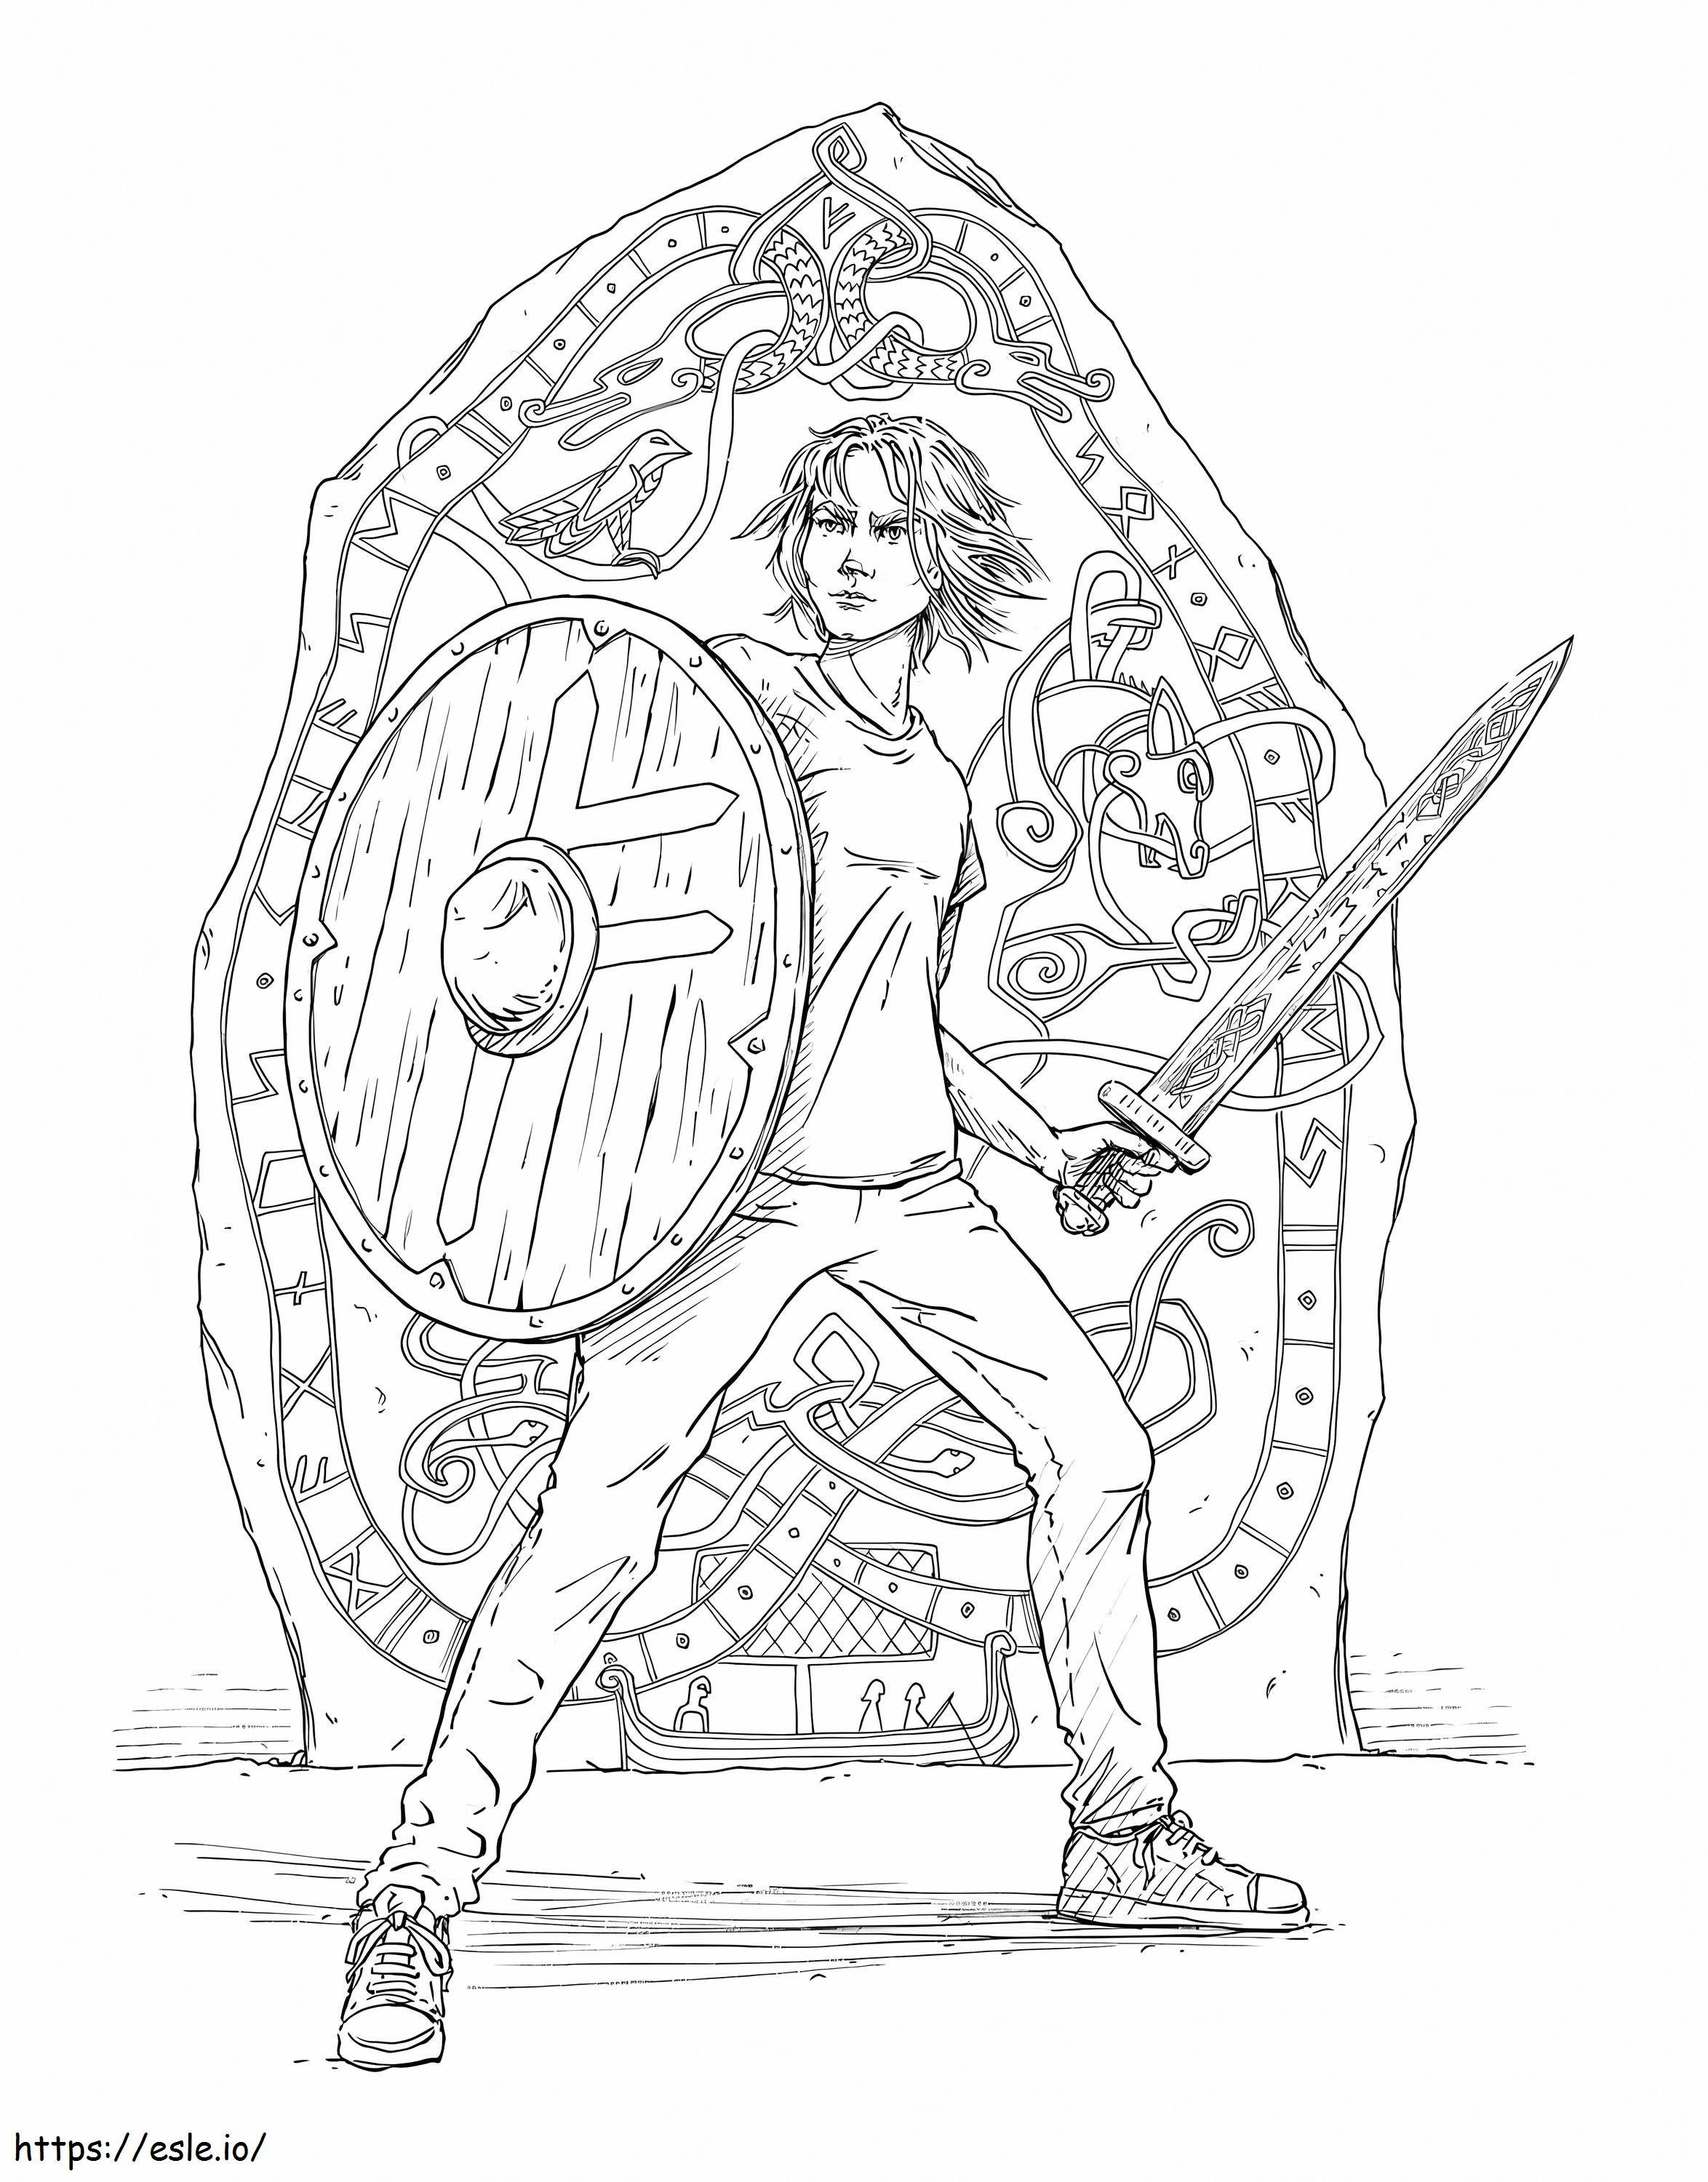 Percy Jackson 4 coloring page